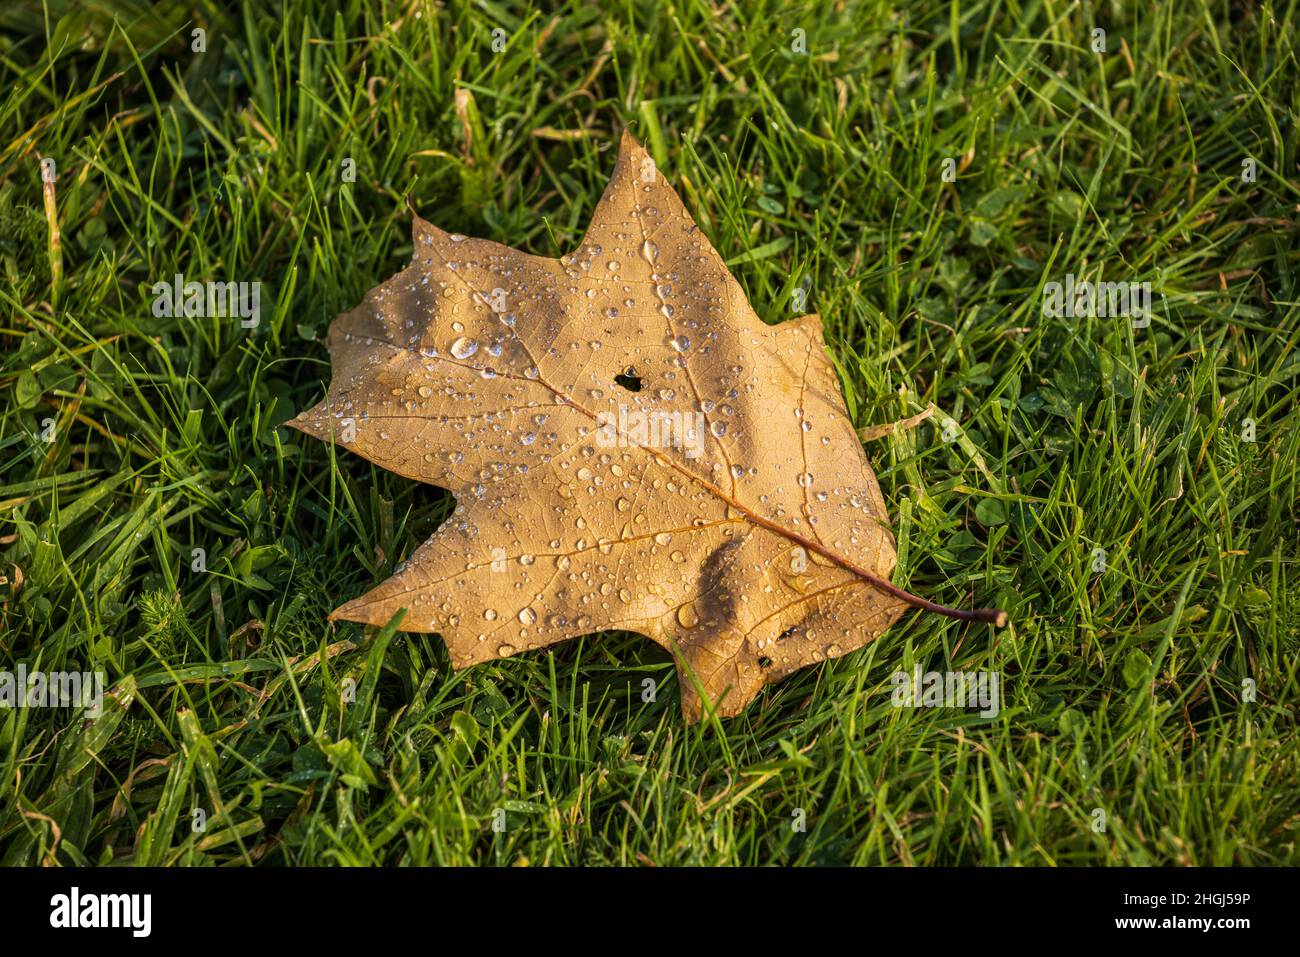 Raindrops on a leaf on the grass, Wakefield, Yorkshire, England, UK Stock Photo